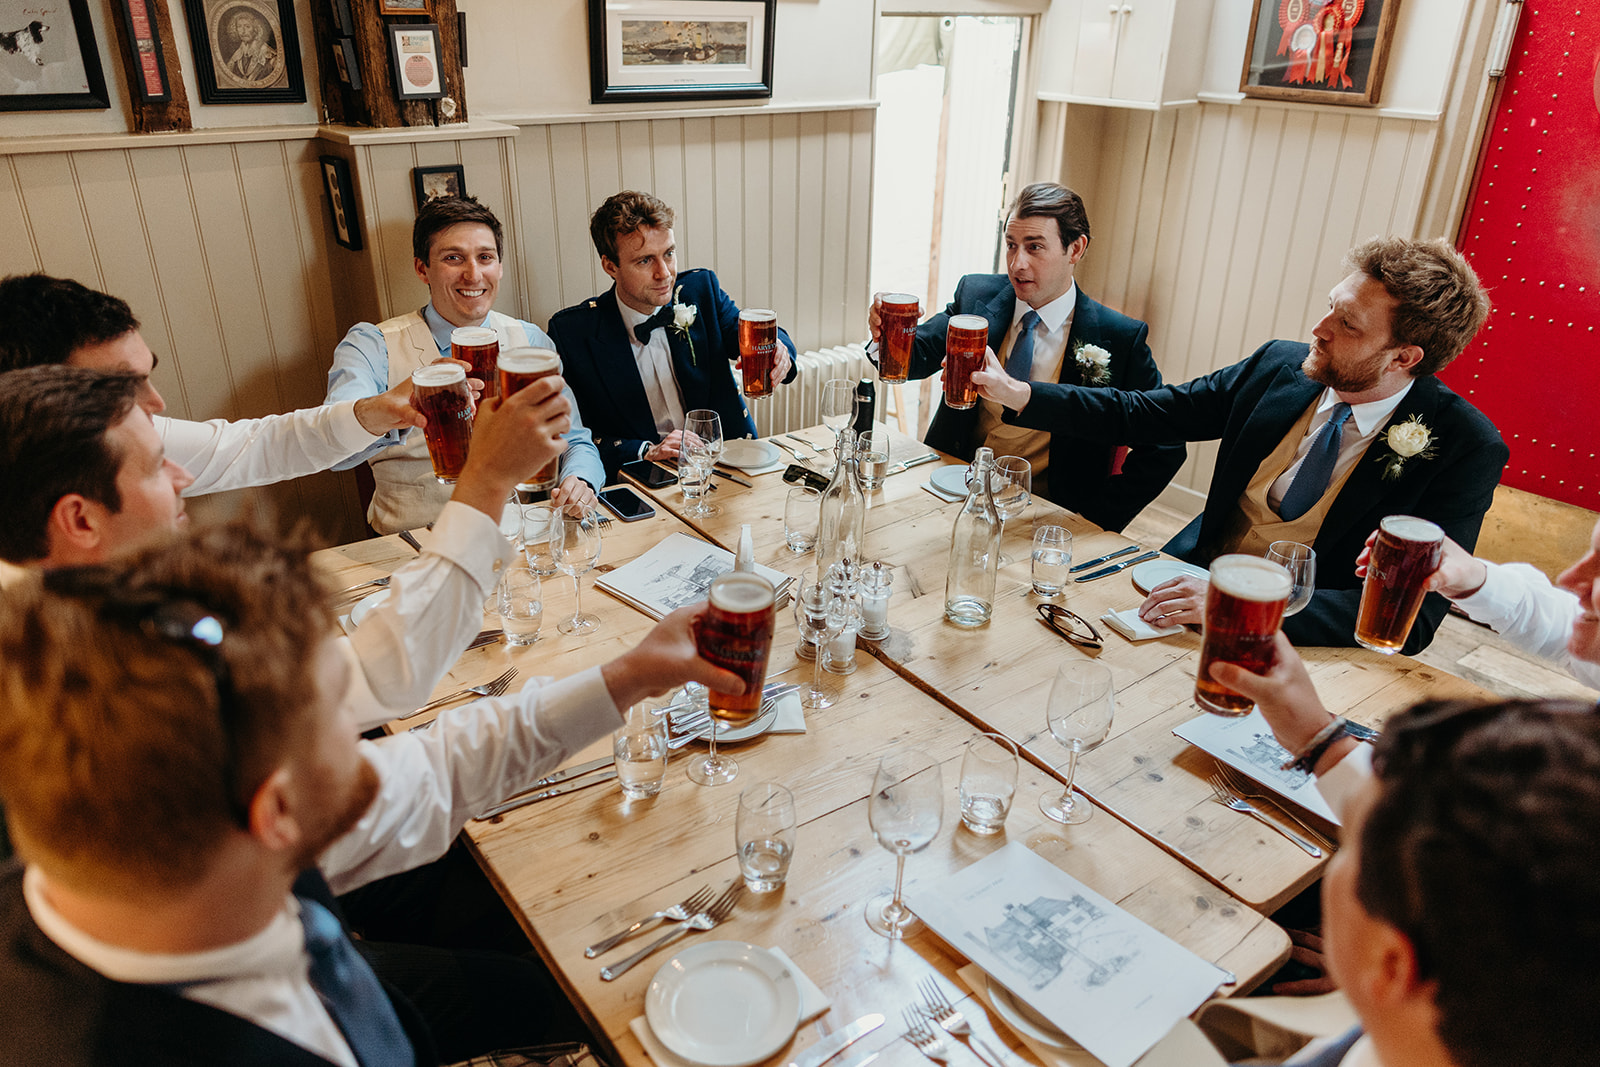 Groom and groomsmen enjoying a pint at a local East Sussex pub before the wedding.